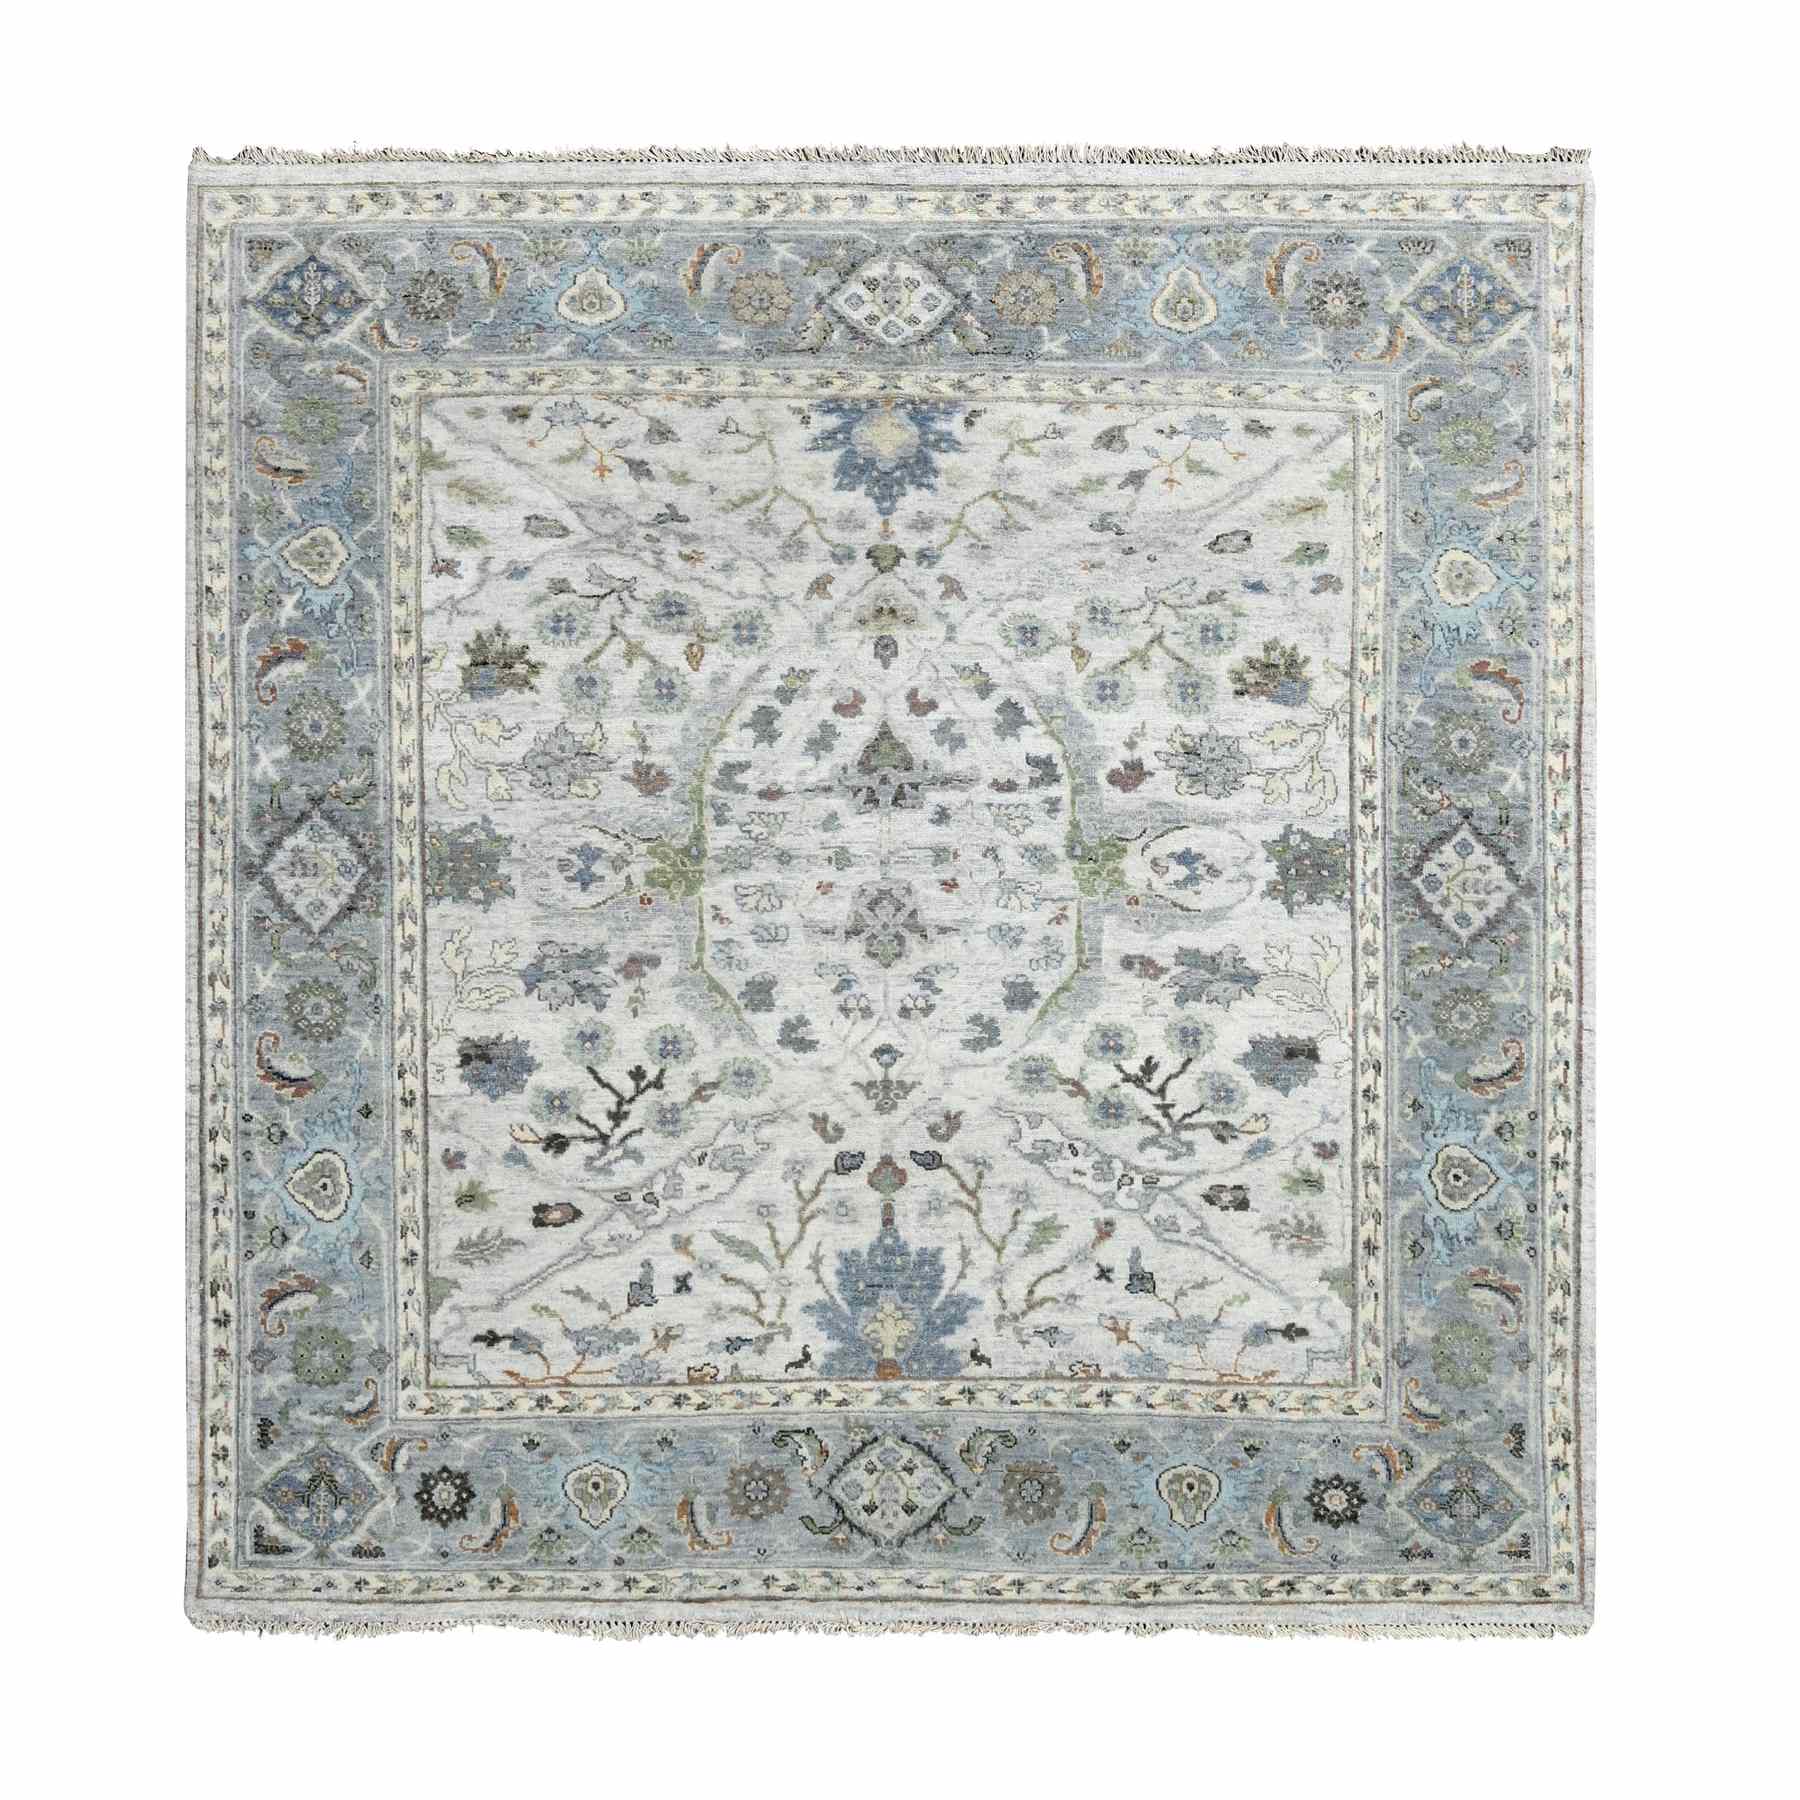 Evening Shadow Gray, Hand Knotted Soft and Vibrant Wool Oushak With Floral Design Natural Dyes, Densely Woven, Square Oriental Rug